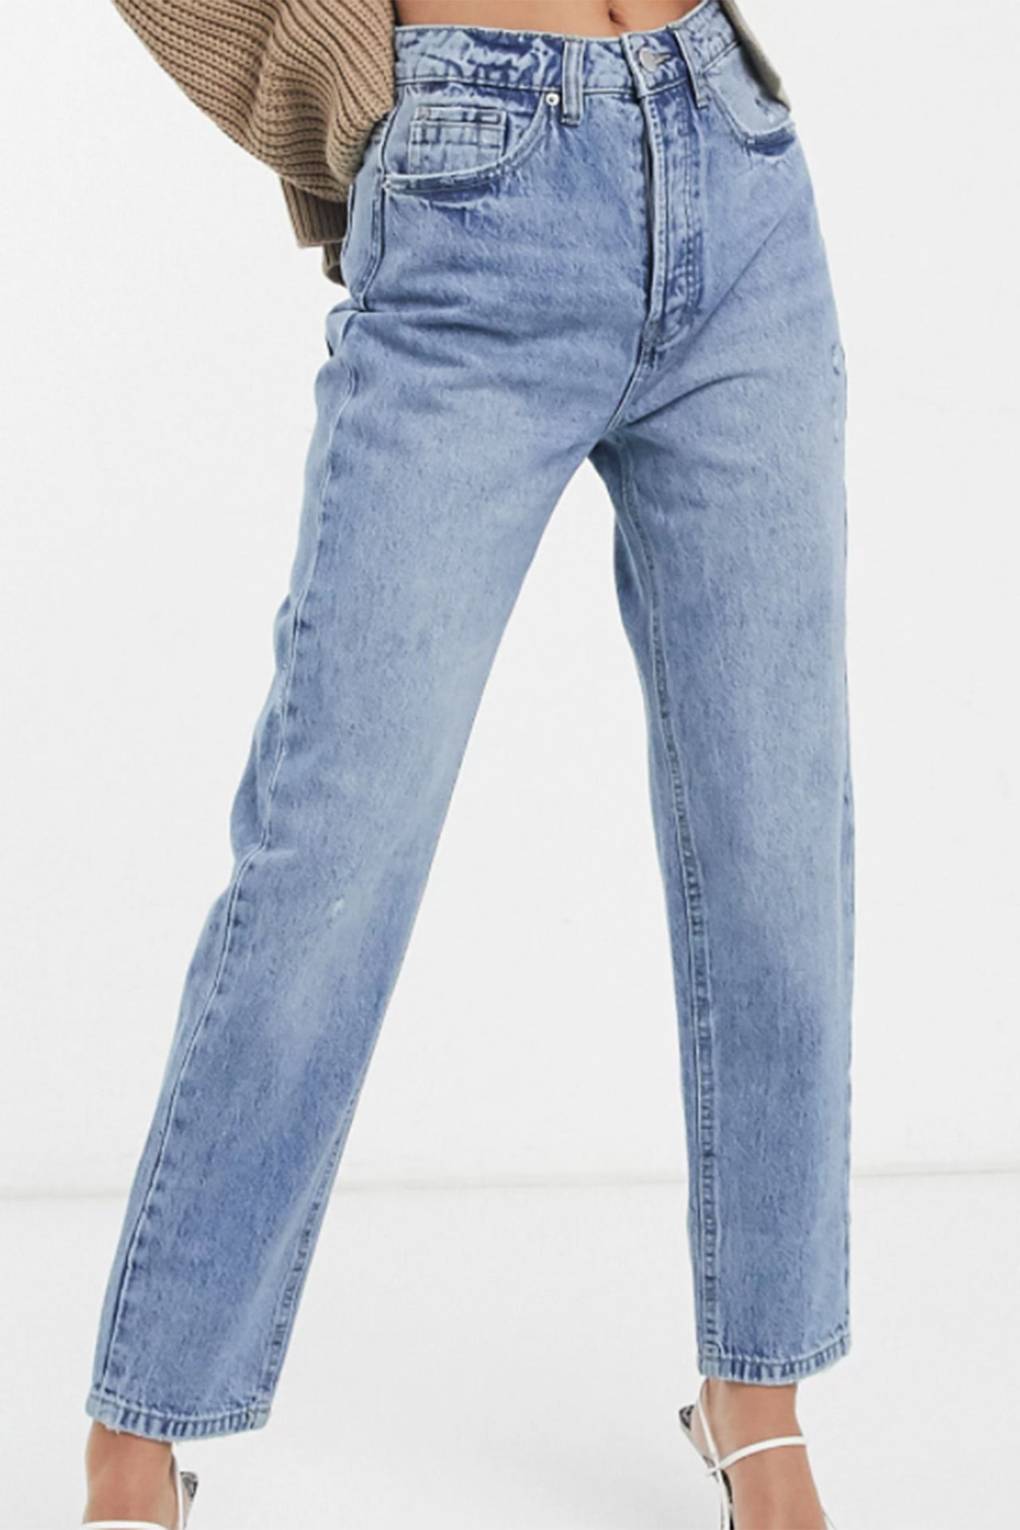 The Best High-Waisted Jeans for Women 2021: All Budgets, Sizes & Styles ...